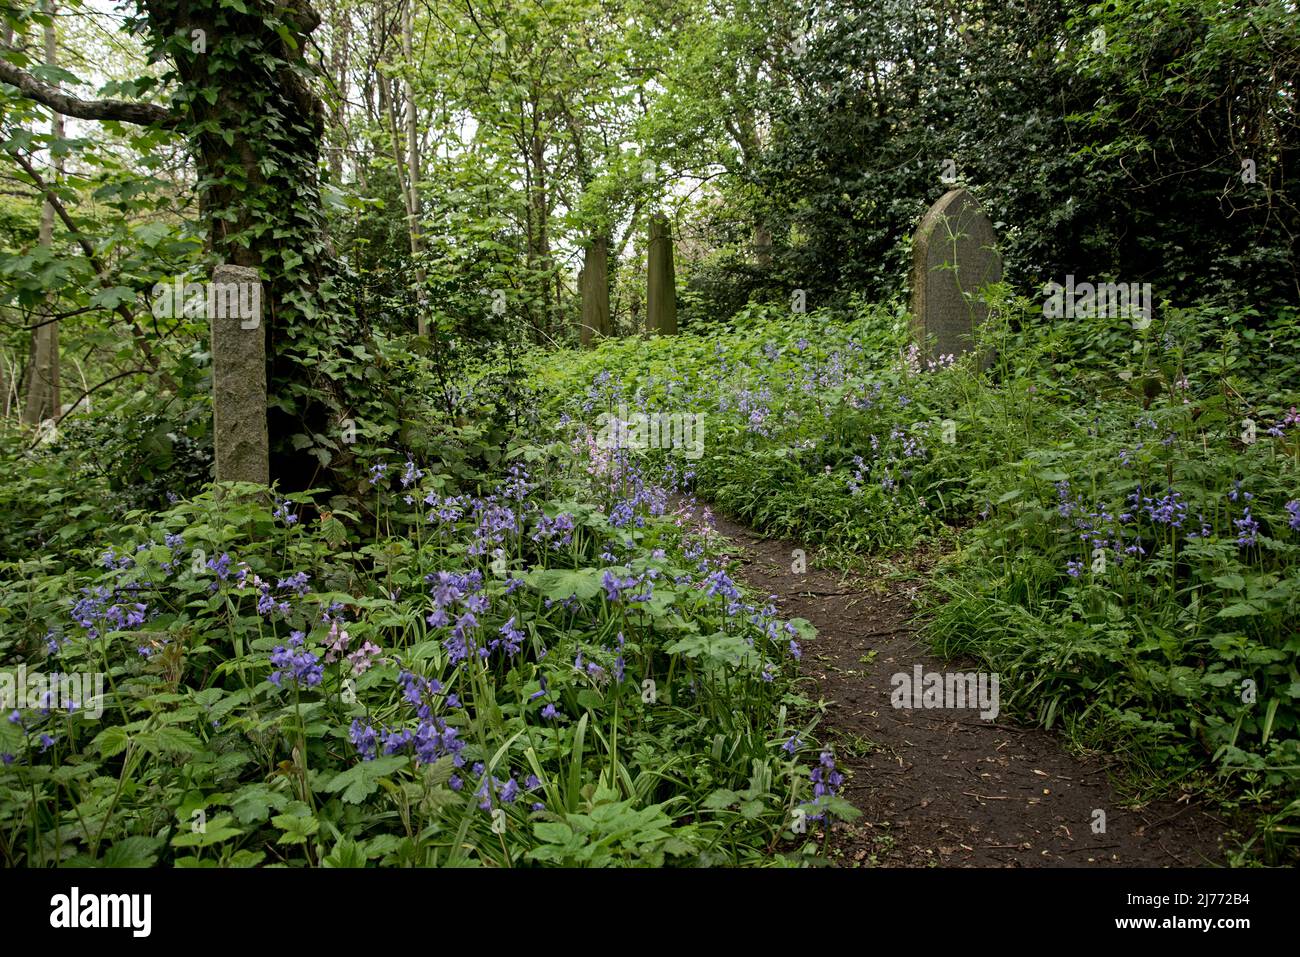 Bluebells growing in an overgrown and neglected cemetery in Edinburgh, Scotland, UK. Stock Photo